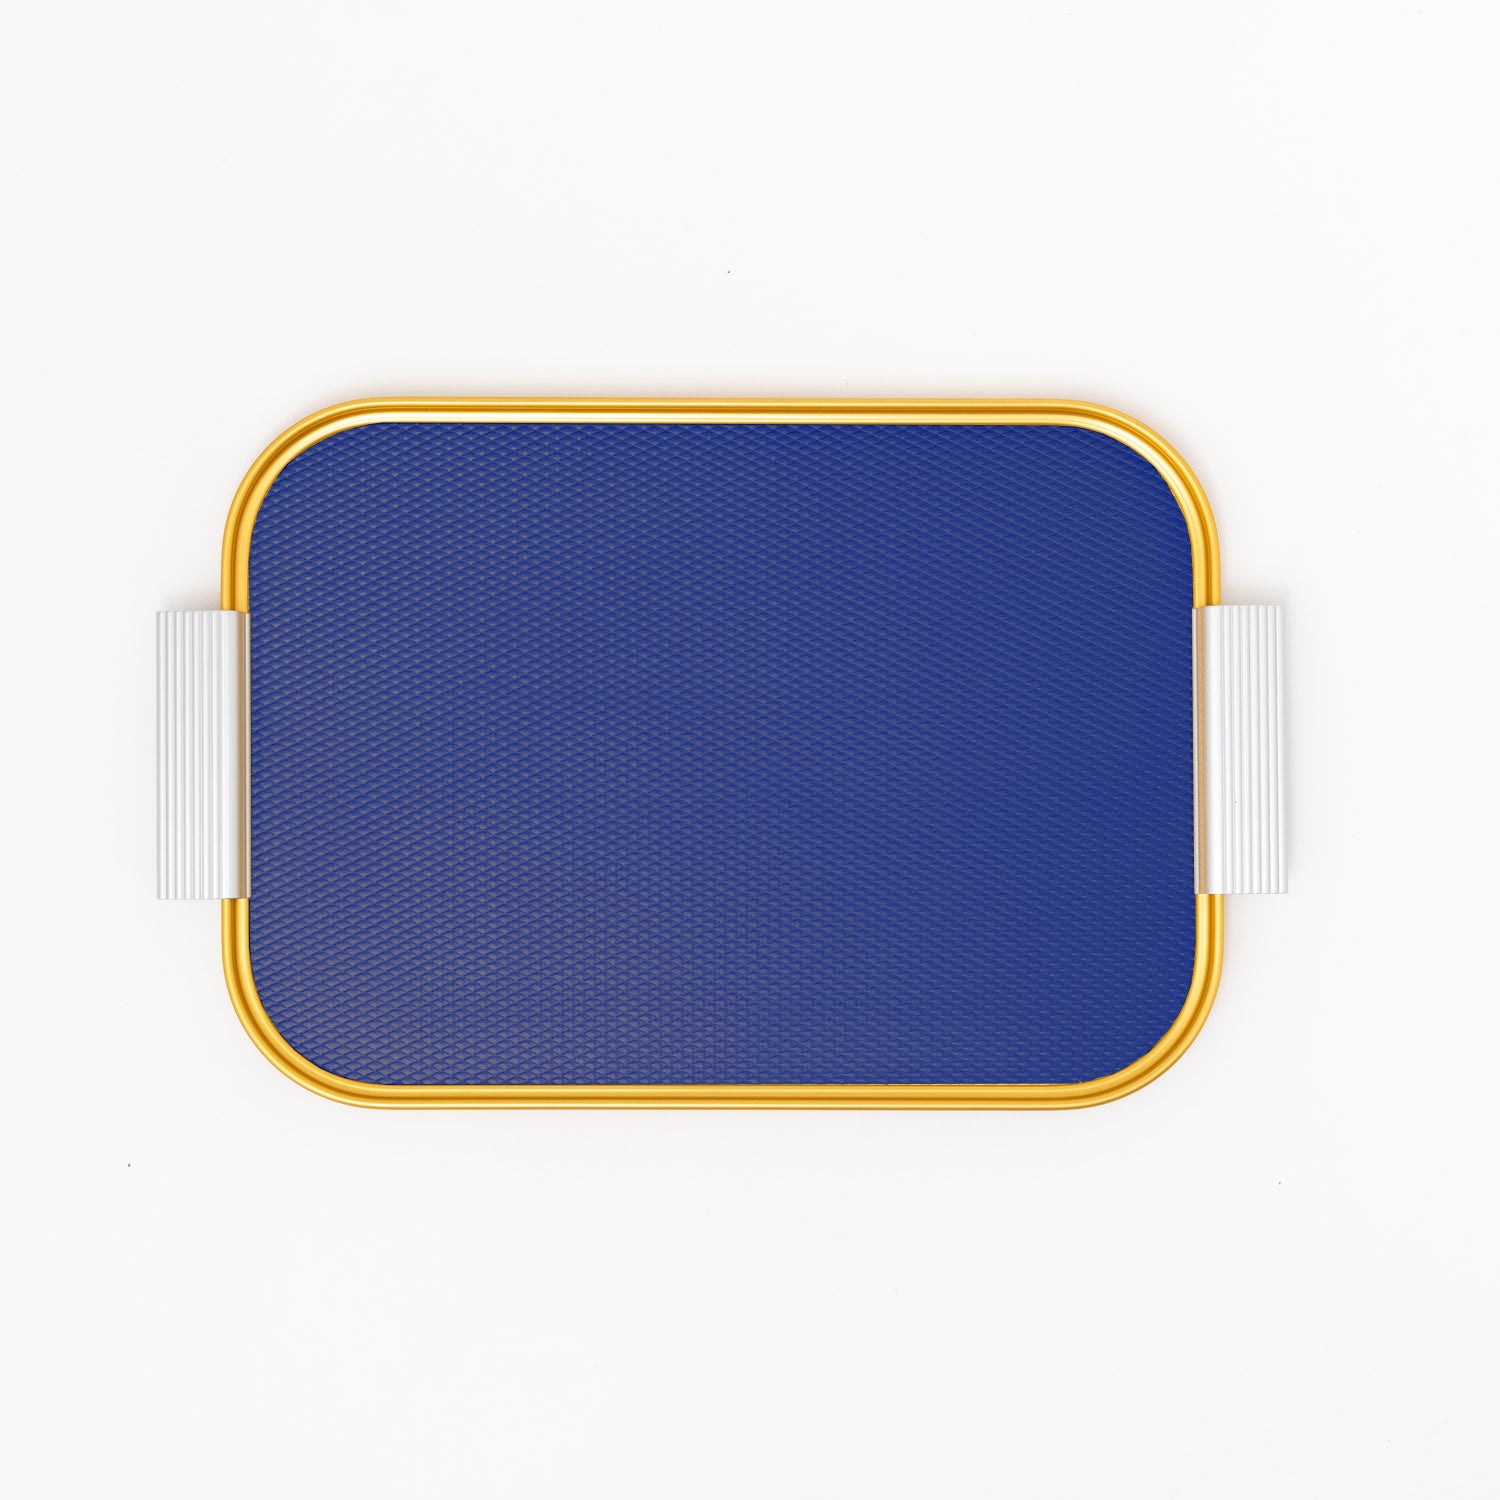 Kaymet metal ribbed tray size S14 in royal blue, gold and silver